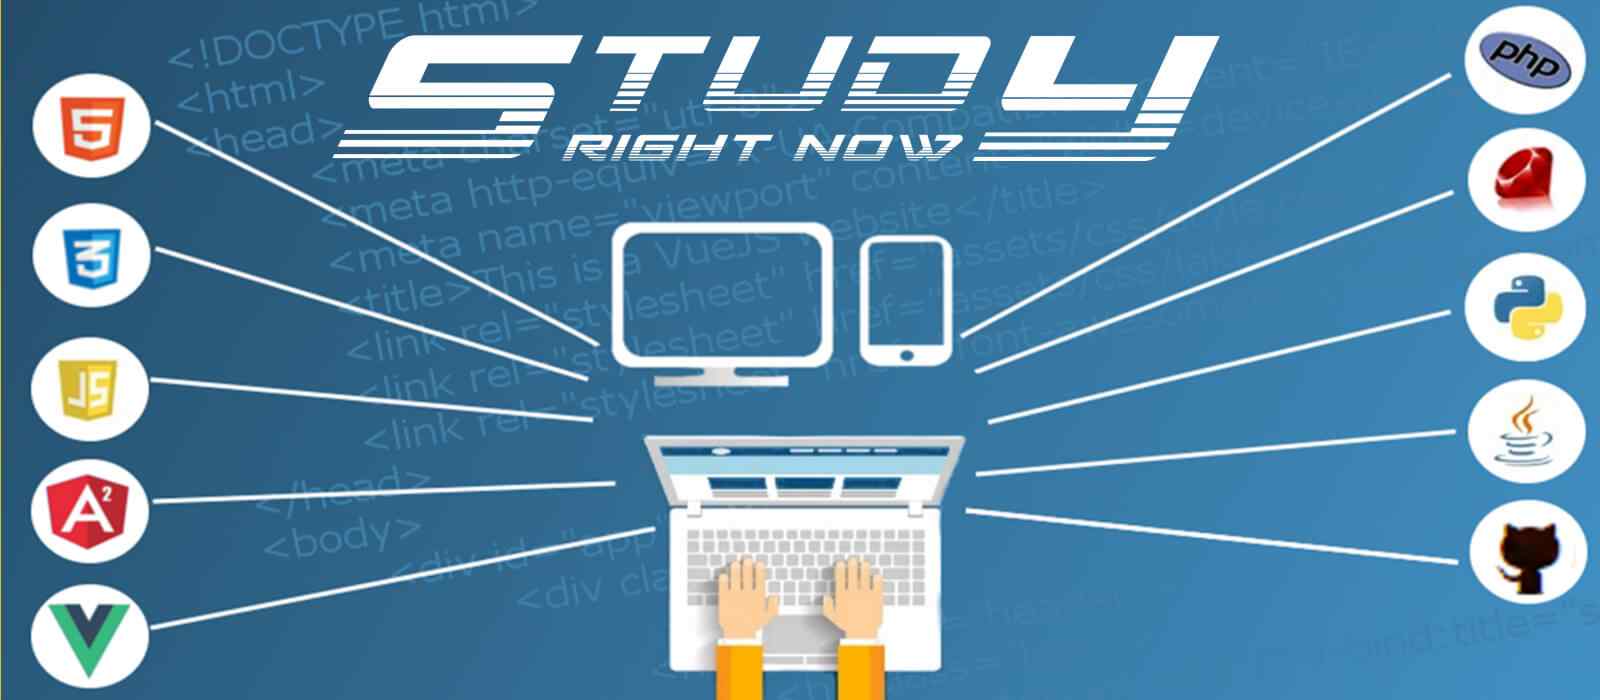 PHP Tutorial Online and Development - Study Right Now 